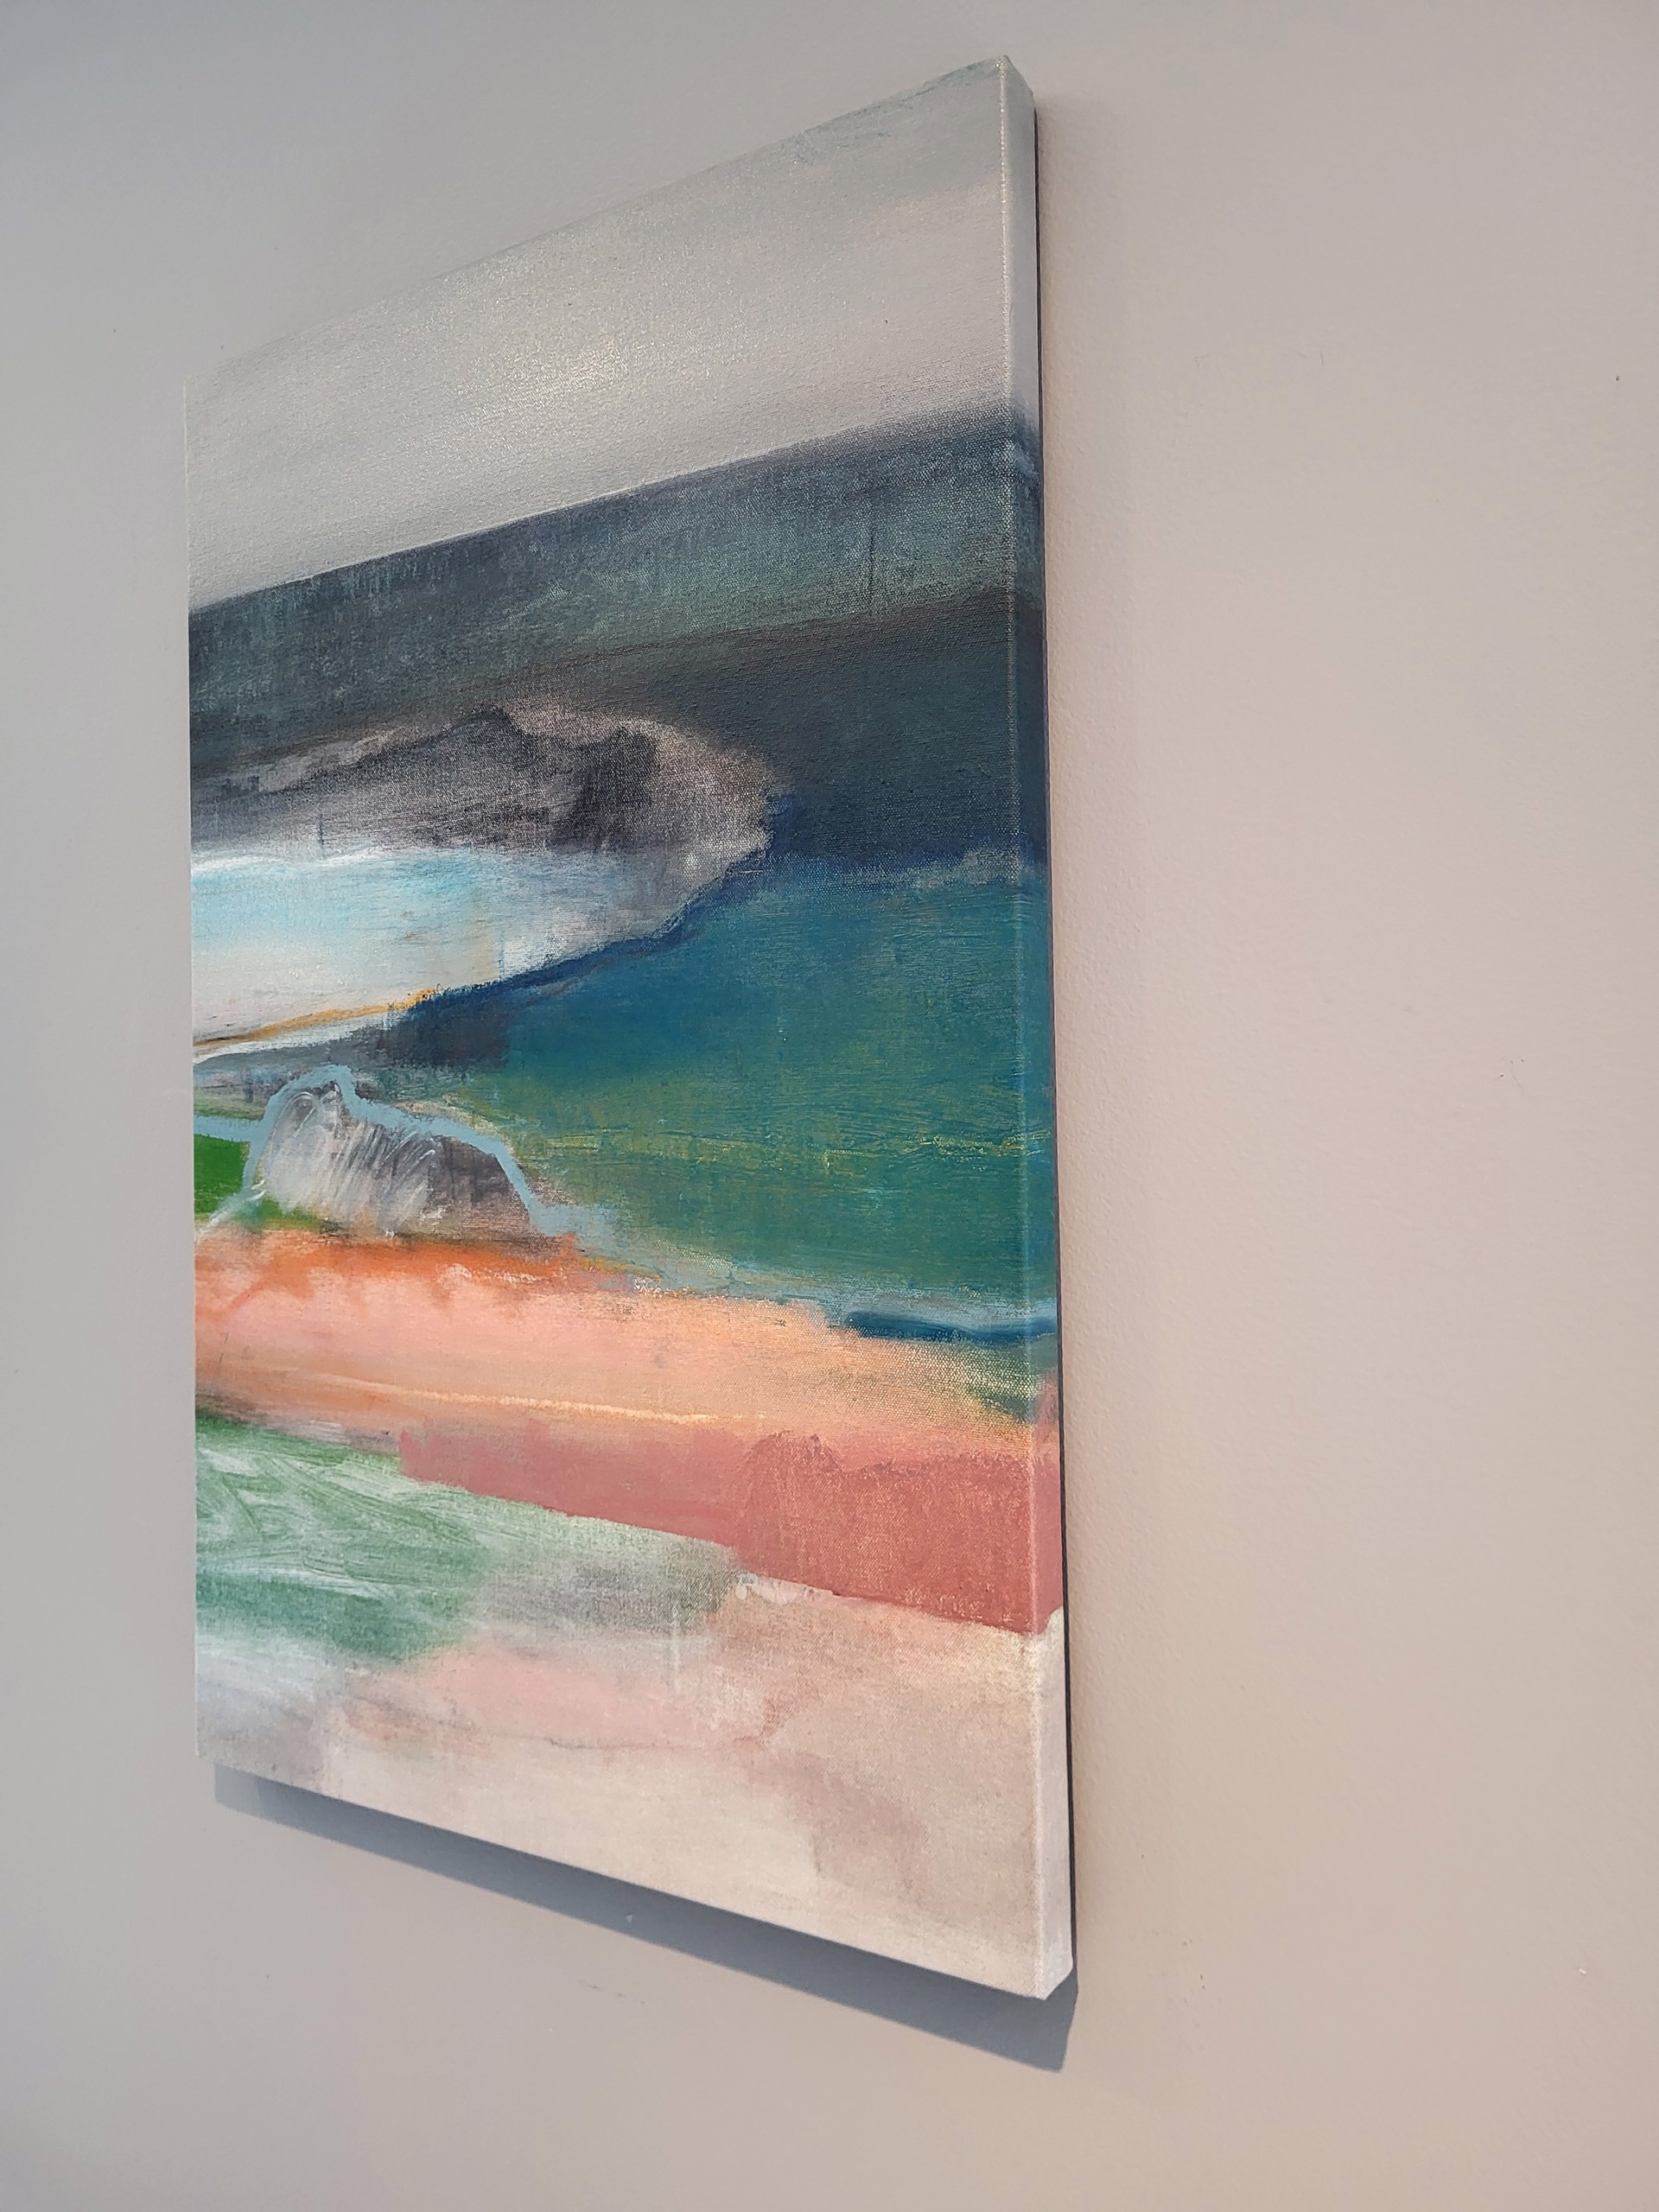 WHERE THE WATER AND LAND MEET by CHRISTINA THWAITES (Landscape)